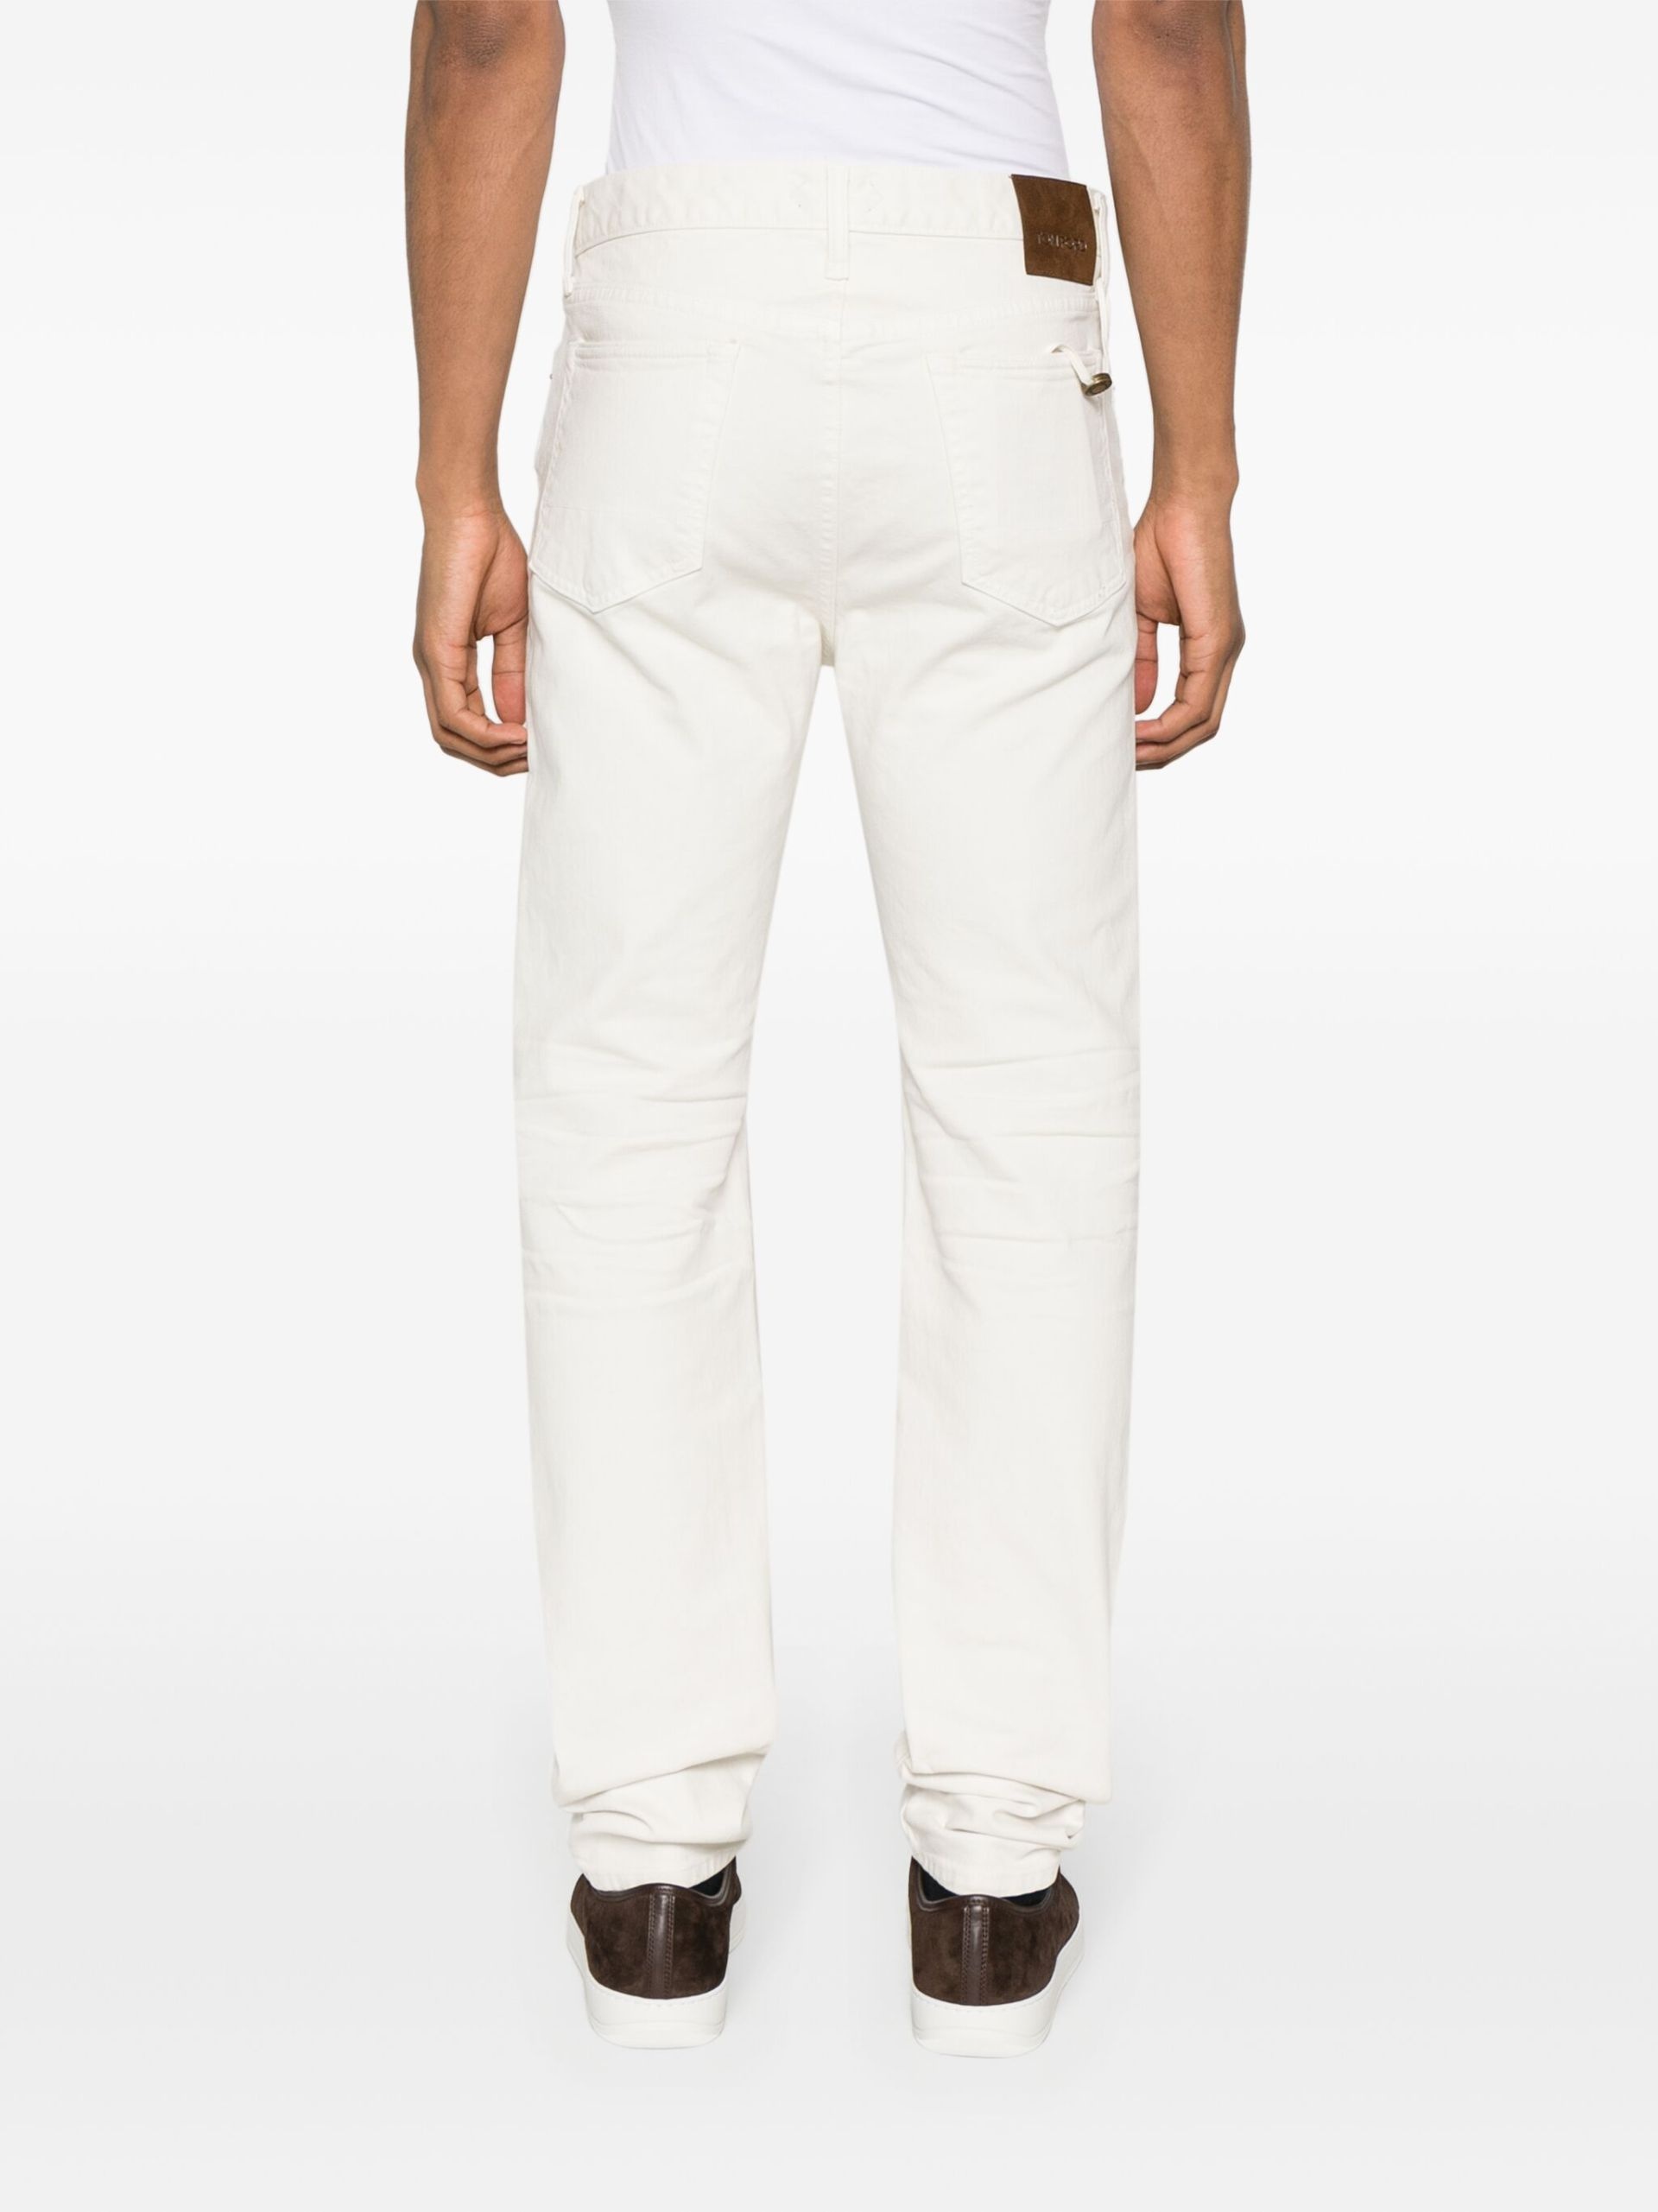 White Whiskering-Effect Jeans - 4